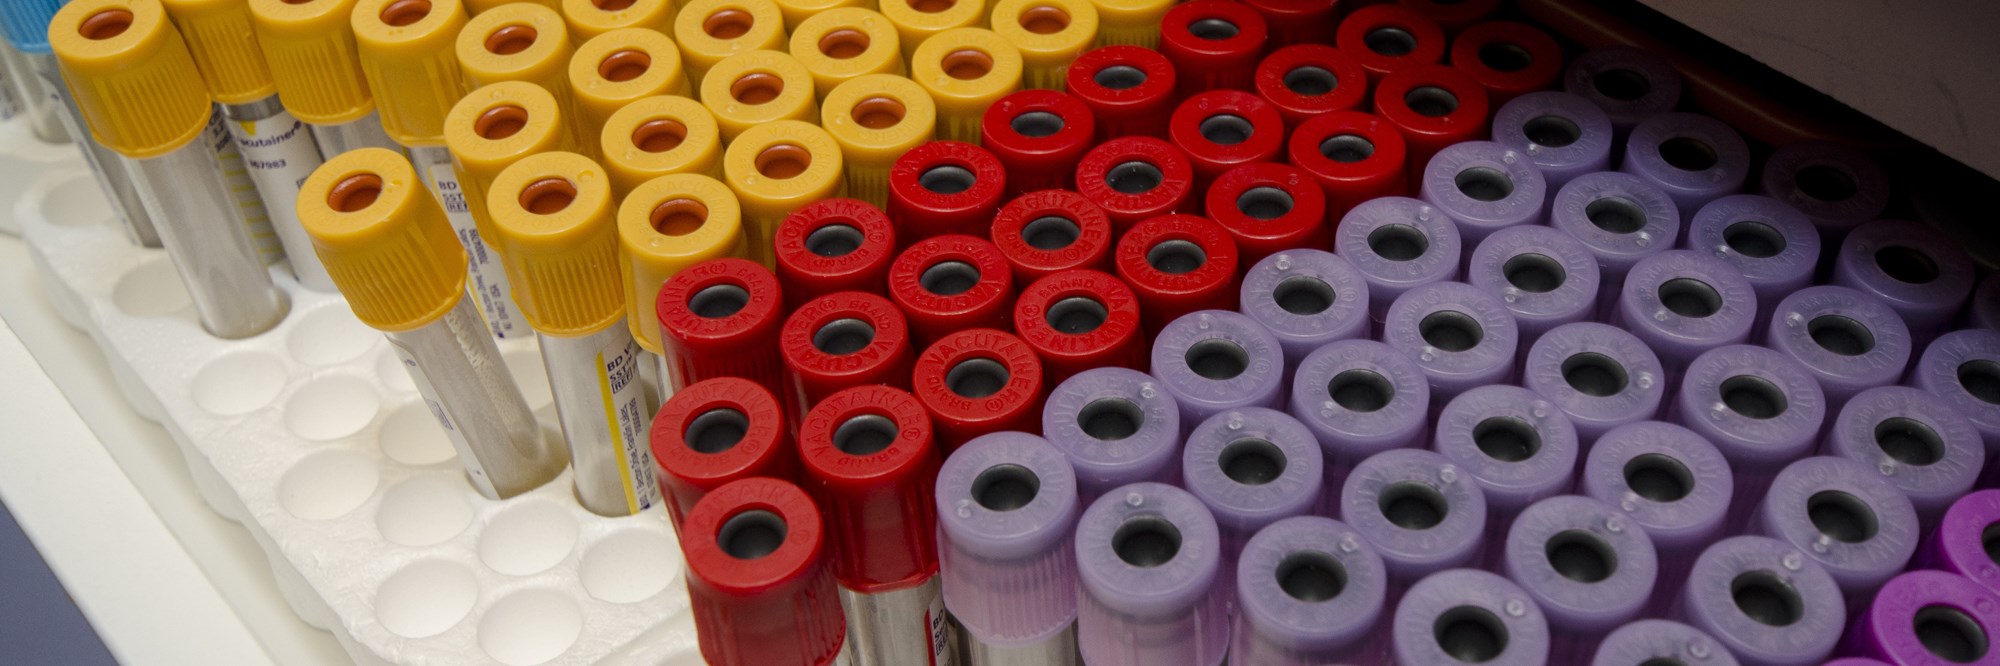 Dozens of blood samples with red, orange and purple lids